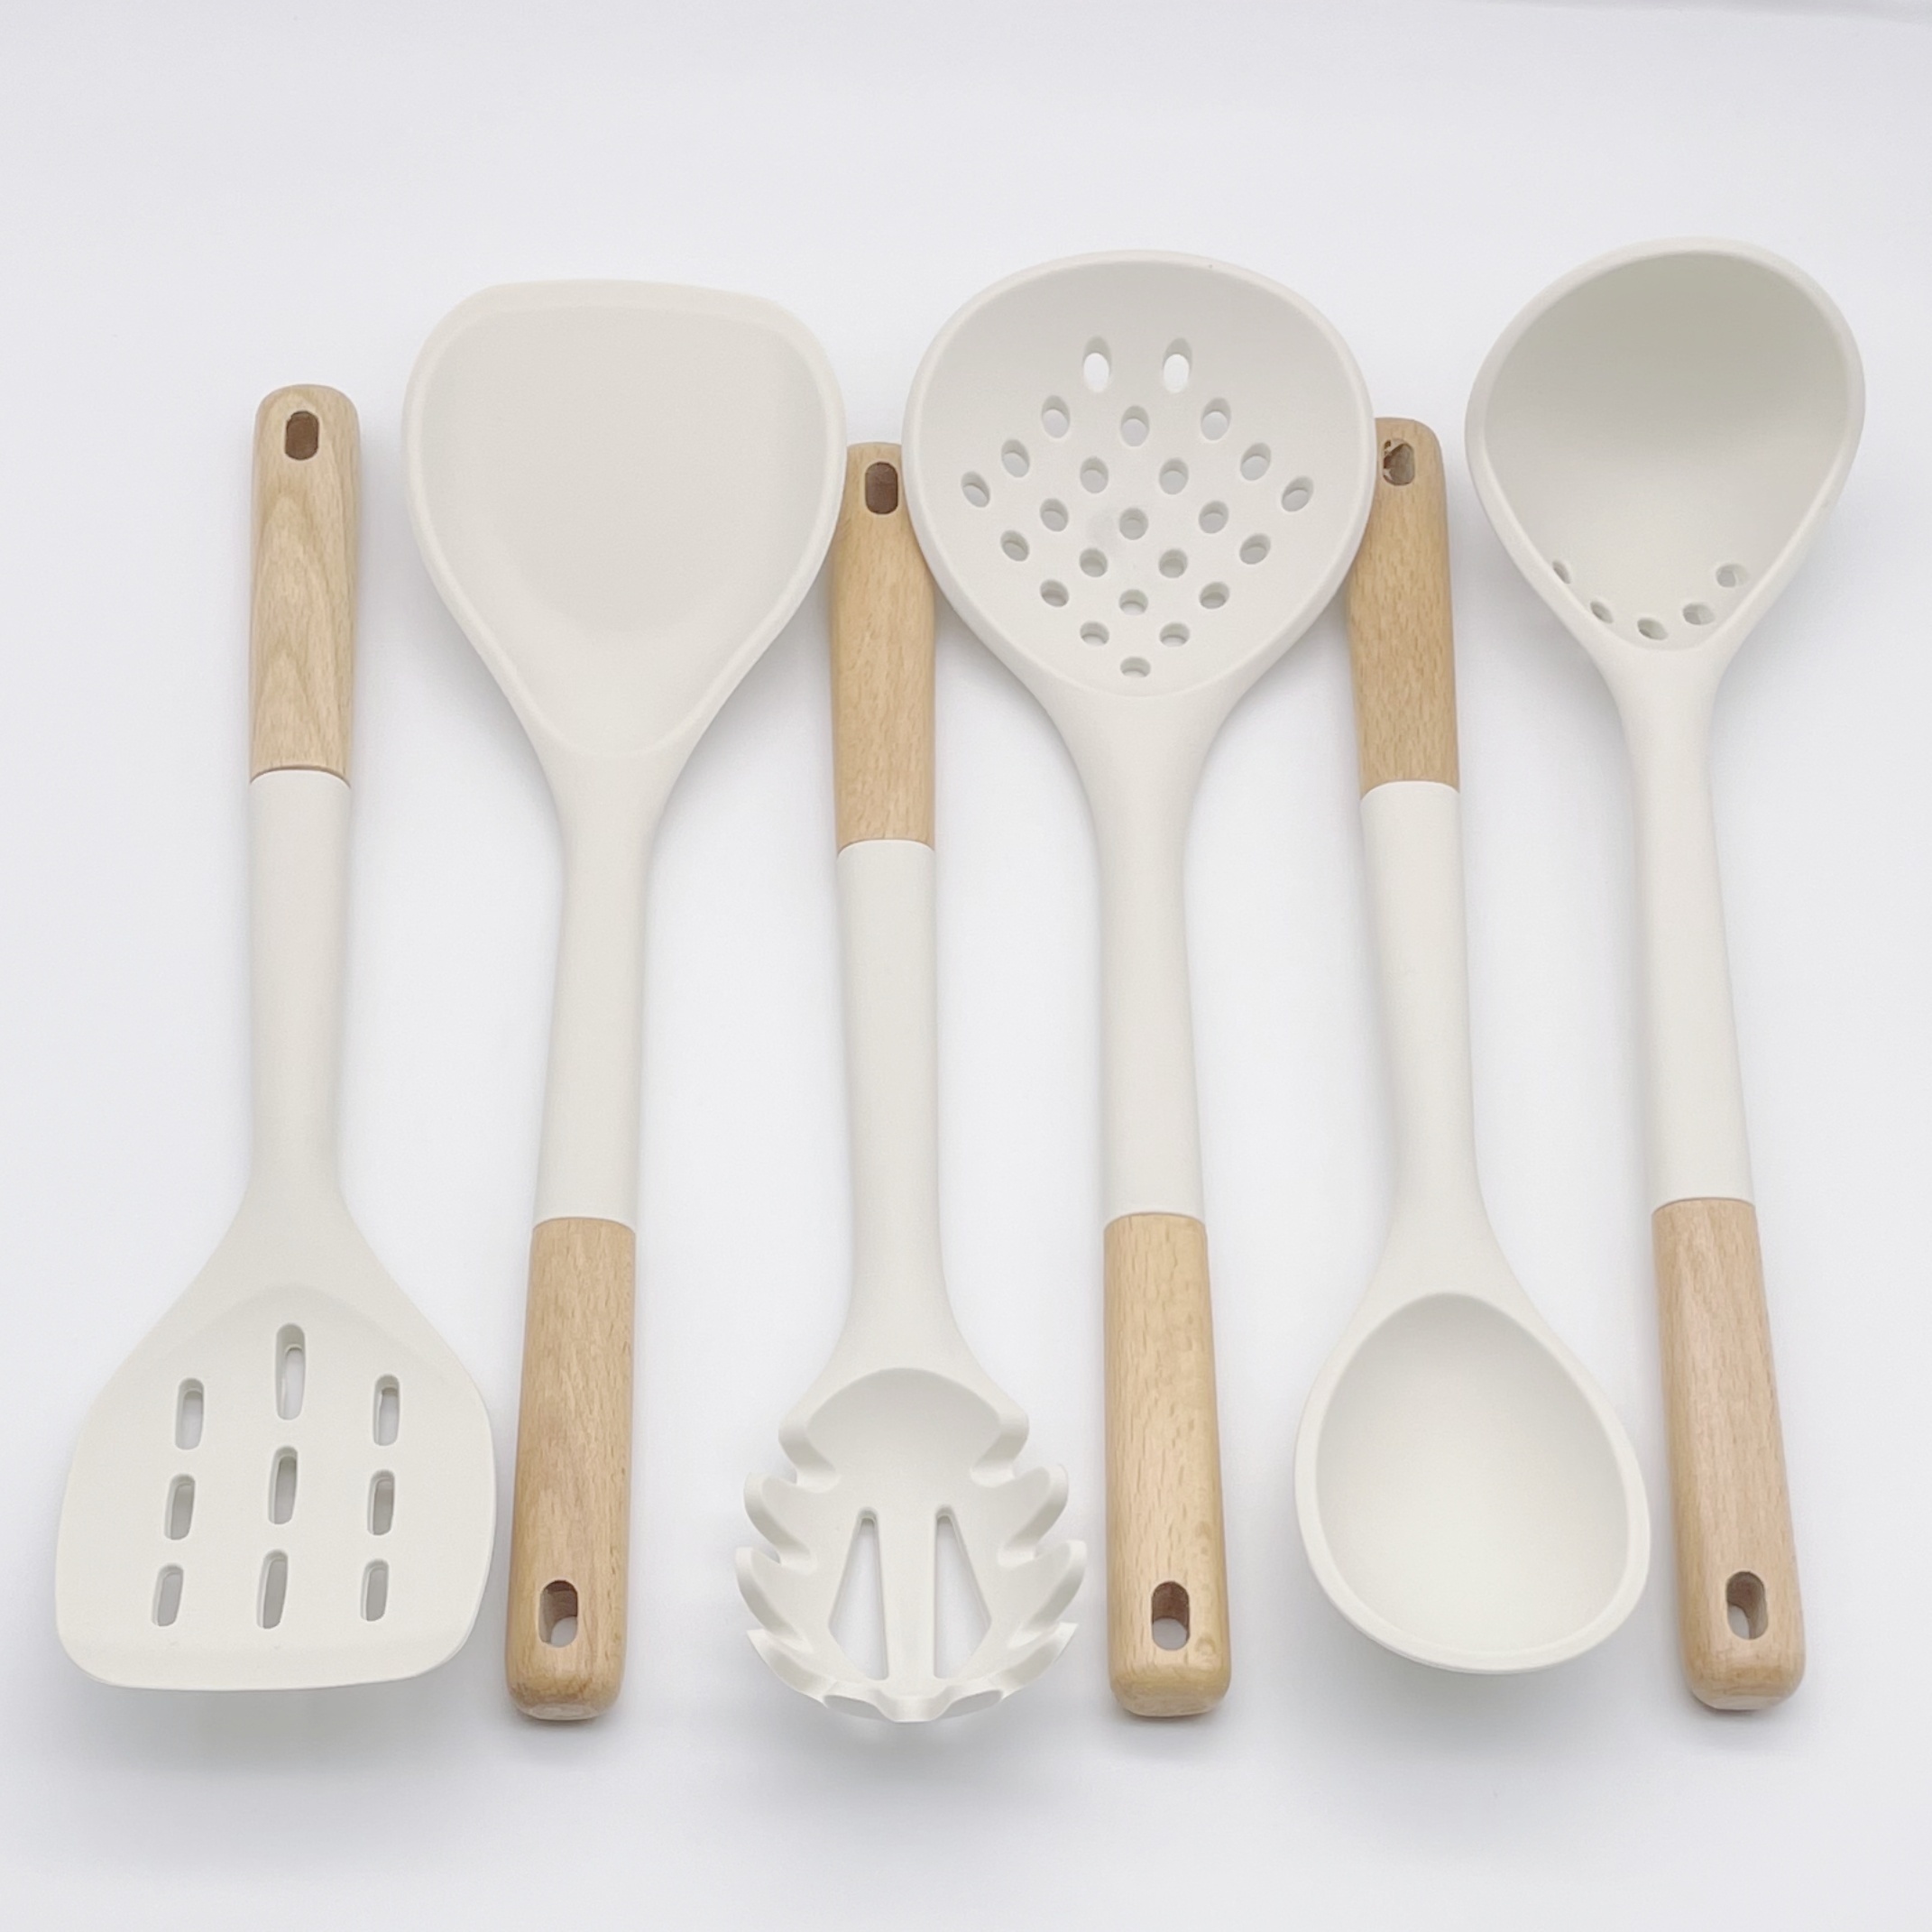 New Milk White Wood Handle Silicone Kitchenware Set of 10 Pieces Non Stick  Silicone Kitchenware Spatula Spoon Set of 10 Pieces - China Baking Tool and  Cake Decorating Gun price